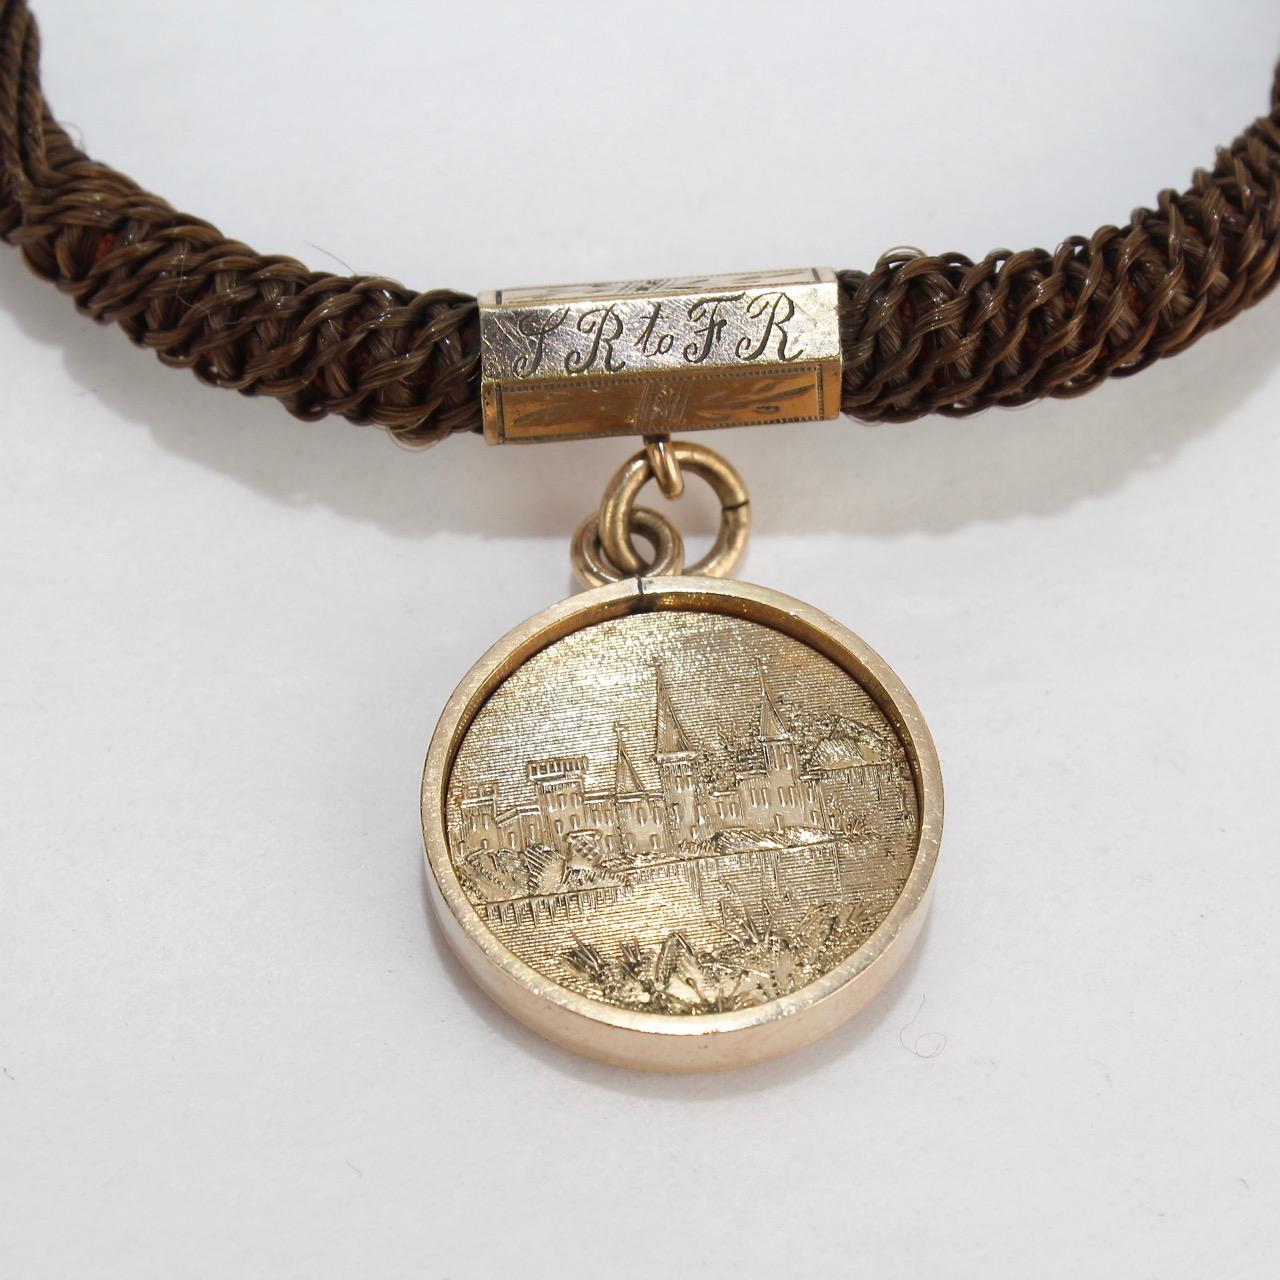 Antique Woven Hair and Gold-Filled Memorial Watch Chain with Odd Fellows Pendant 3